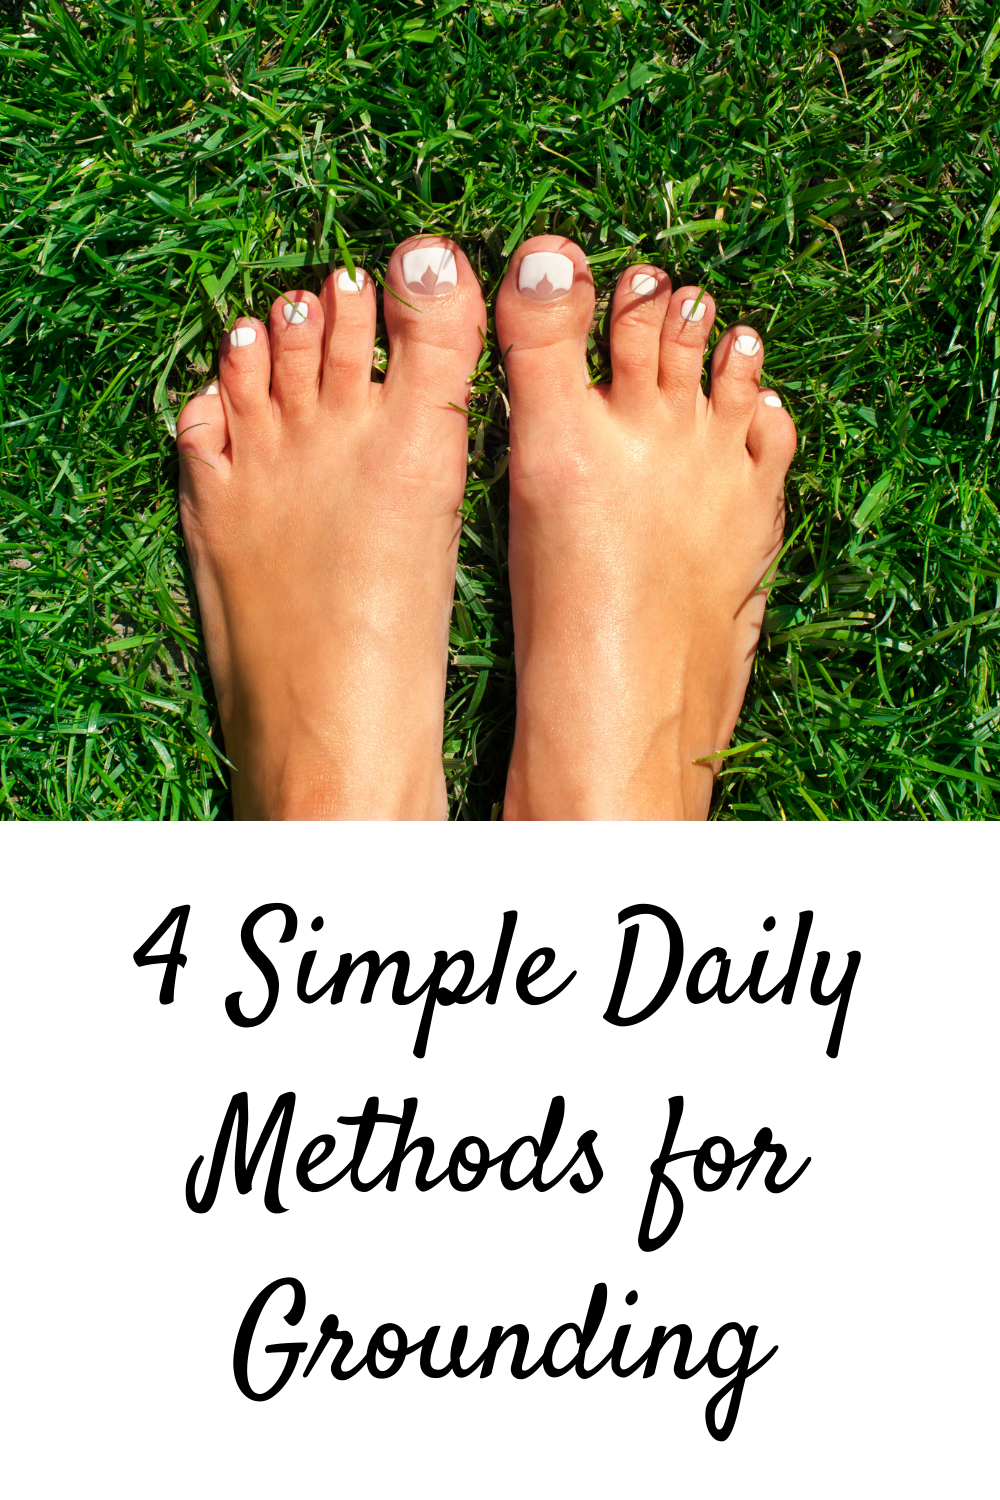 4 Simple Daily Methods for Grounding